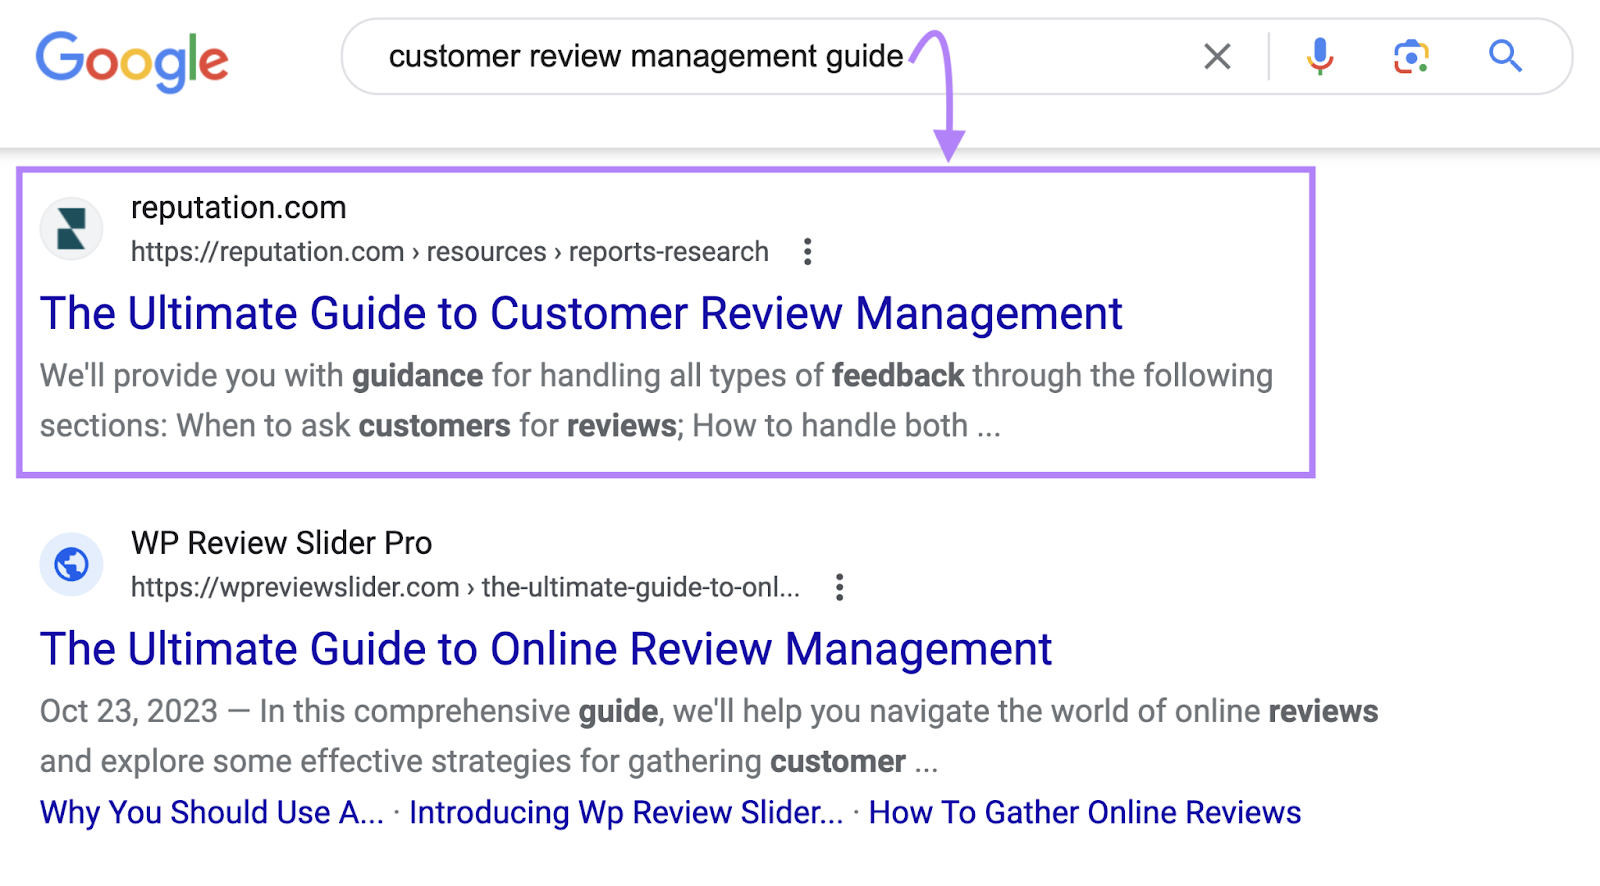 "The Ultimate Guide to Customer Review Management" result highlighted on Google SERP